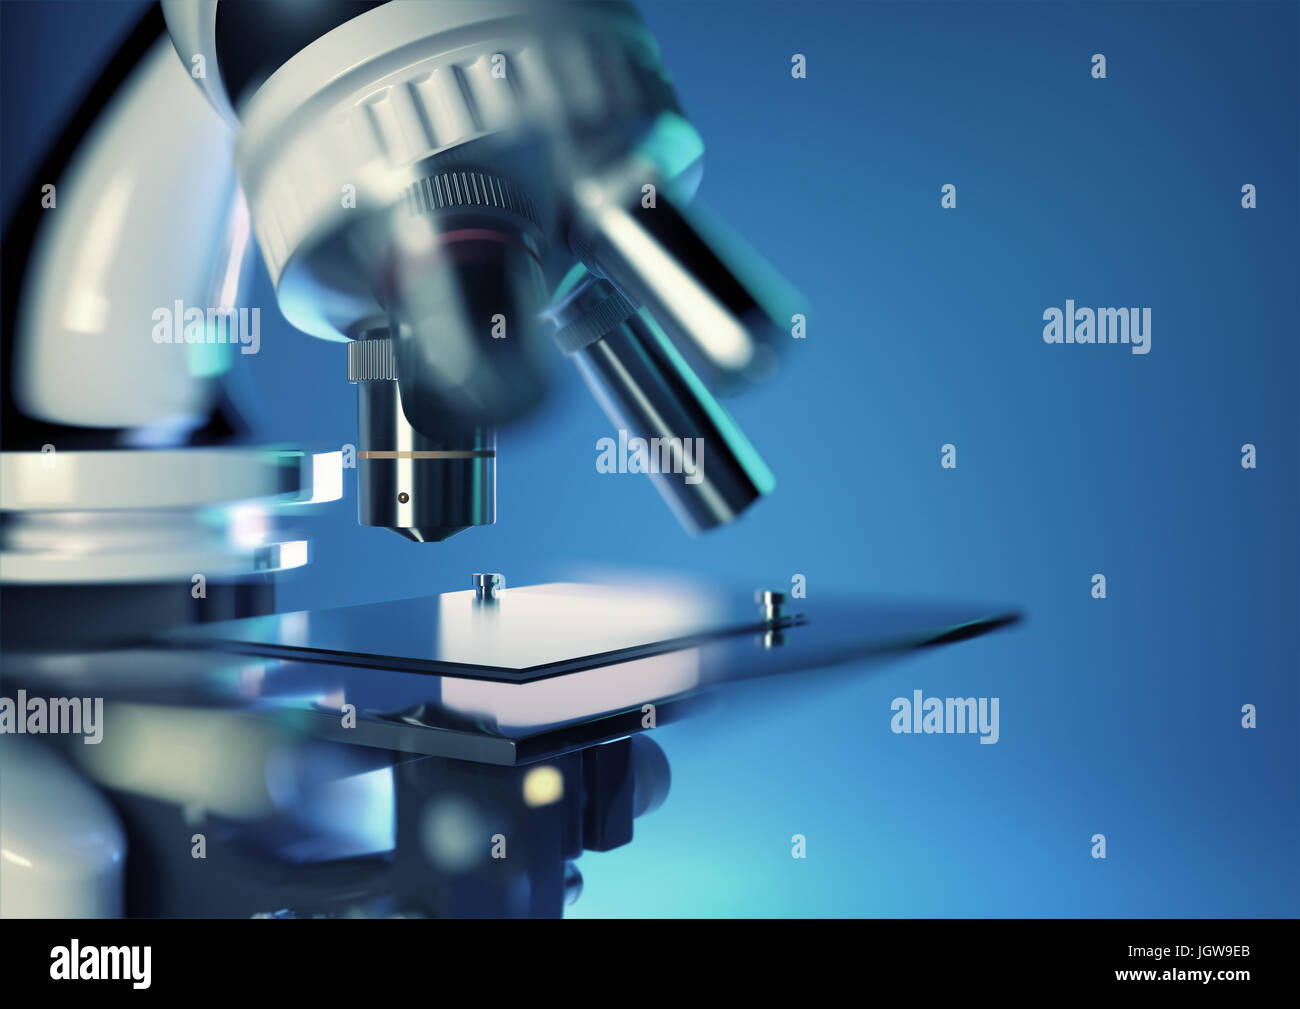 A close up image of a microscope studying a biological sample in a laboratory. 3D illustration. Stock Photo